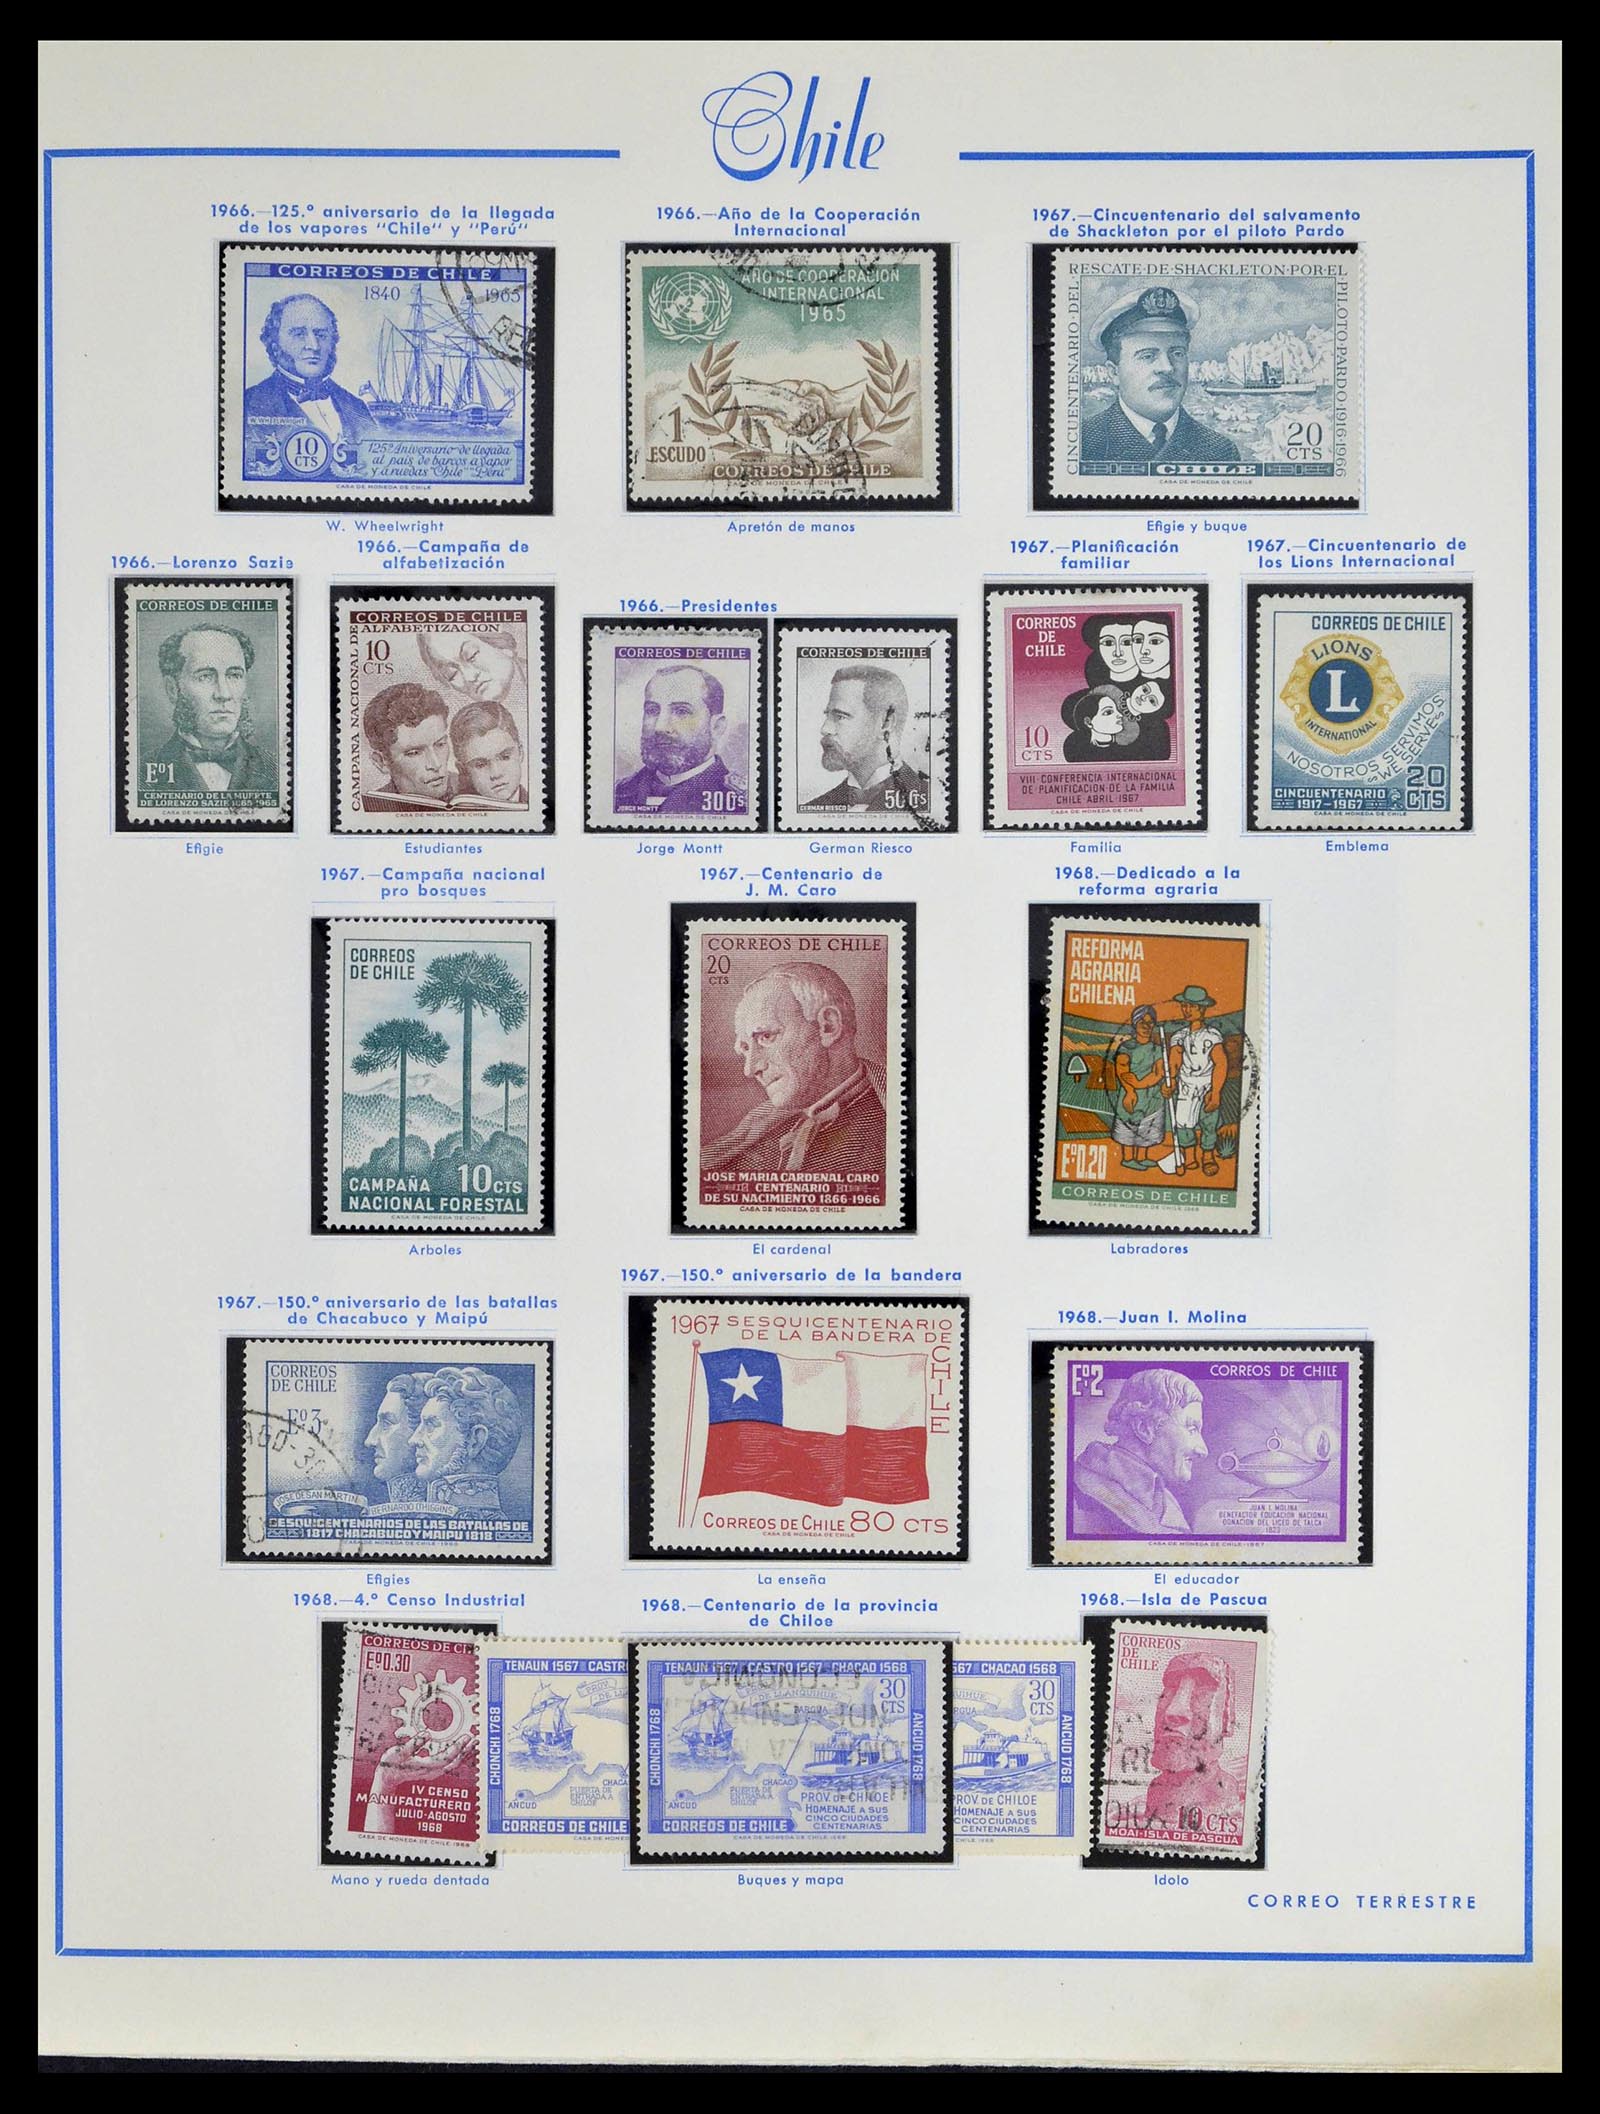 39213 0022 - Stamp collection 39213 Chile 1853-1970.